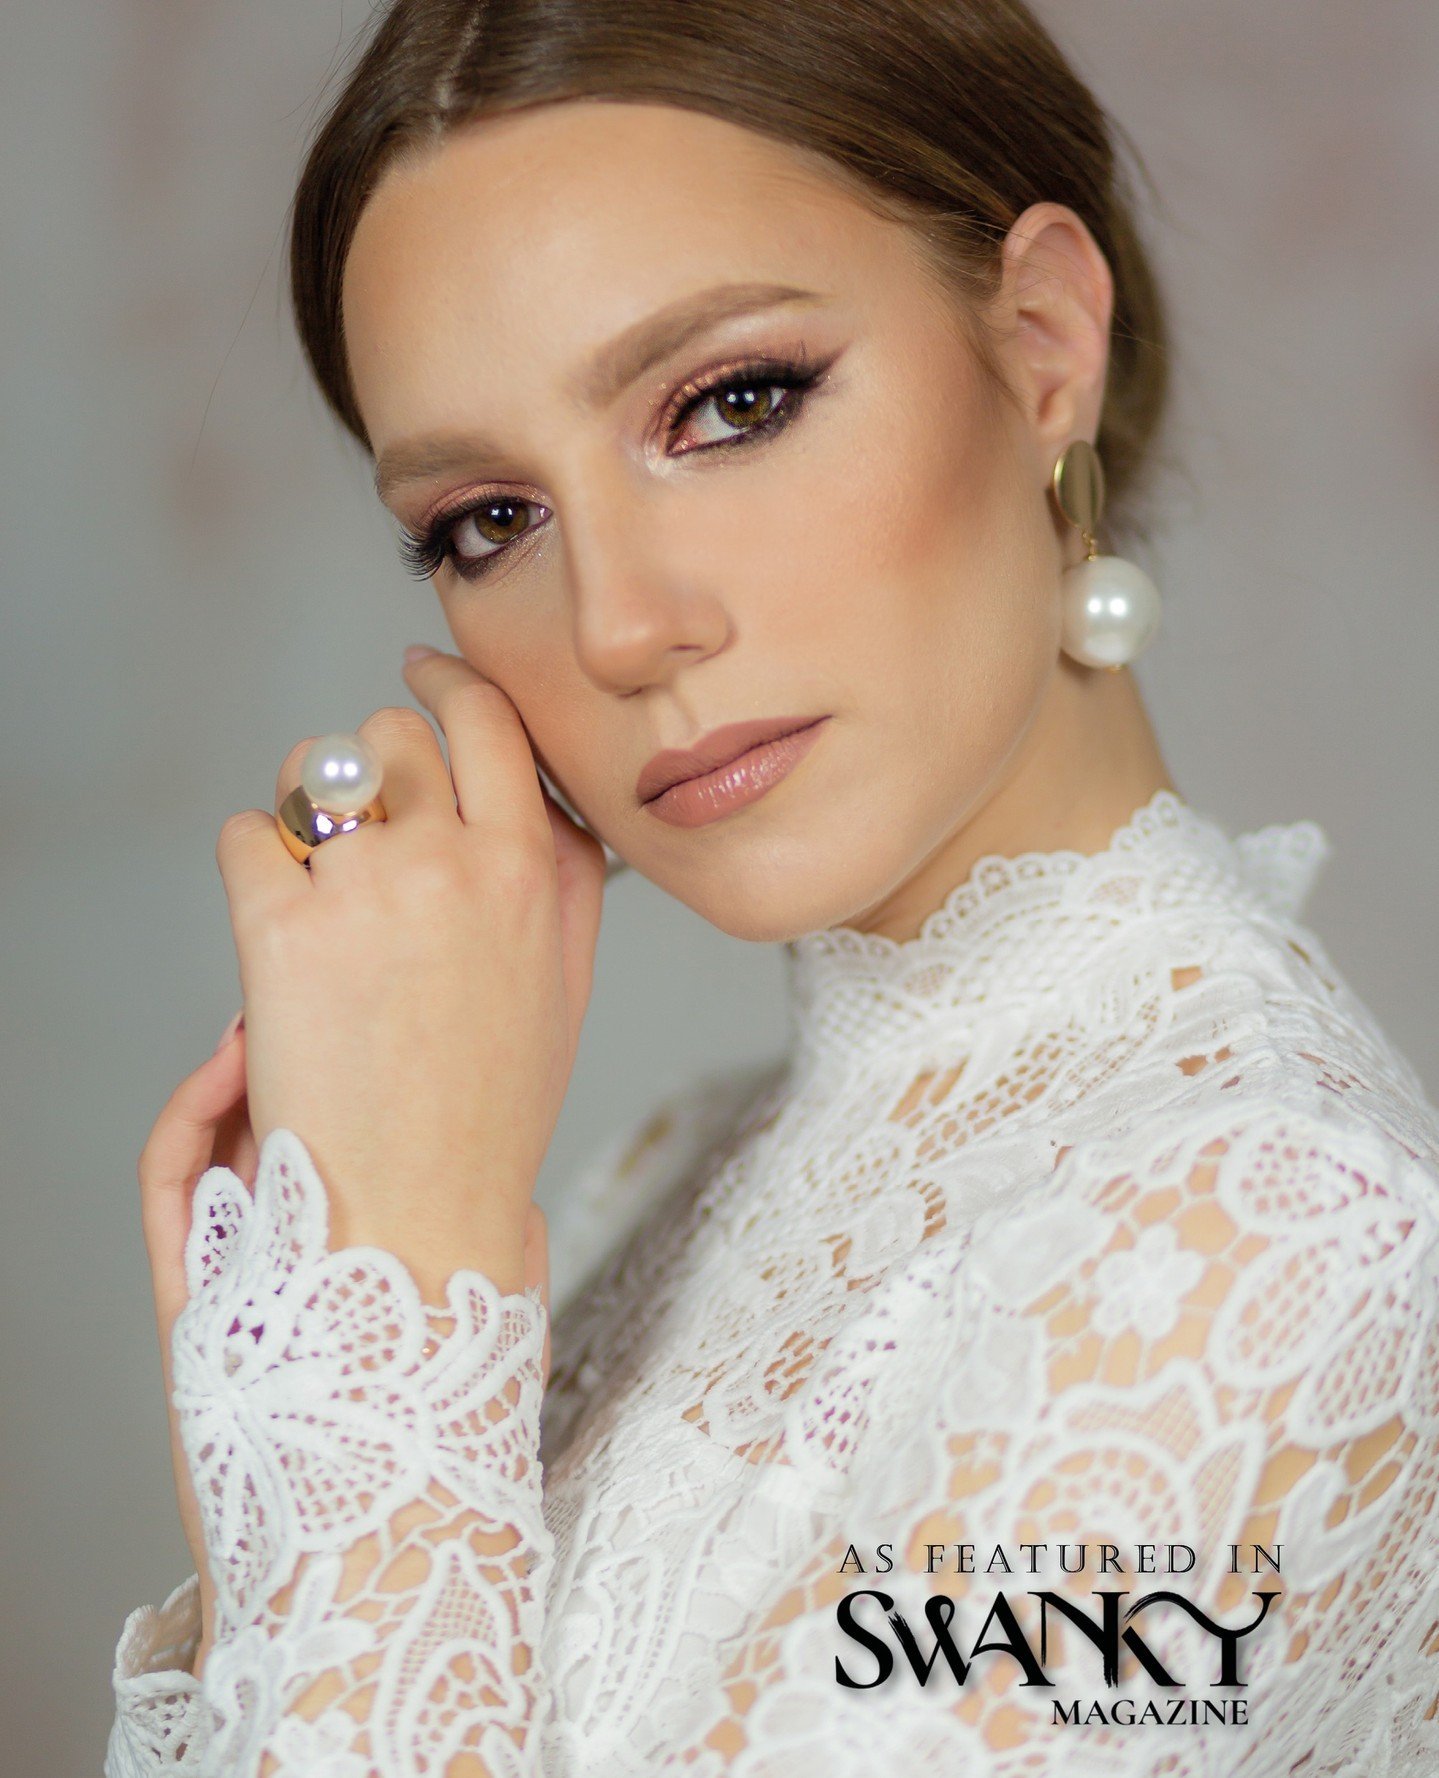 Angelica...💗✨⁠
⁠
Photographer: Salvatore Cosentino⁠
IG: @salvatorecosentinofotografie⁠
WB: www.salvatorecosentinofotografie.it/not-only-brides/⁠
Publication: @swankymag ⁠
@swankyweddingsmagazine⁠
⁠
👰💍Attention all brides-to-be &amp; Wedding photog